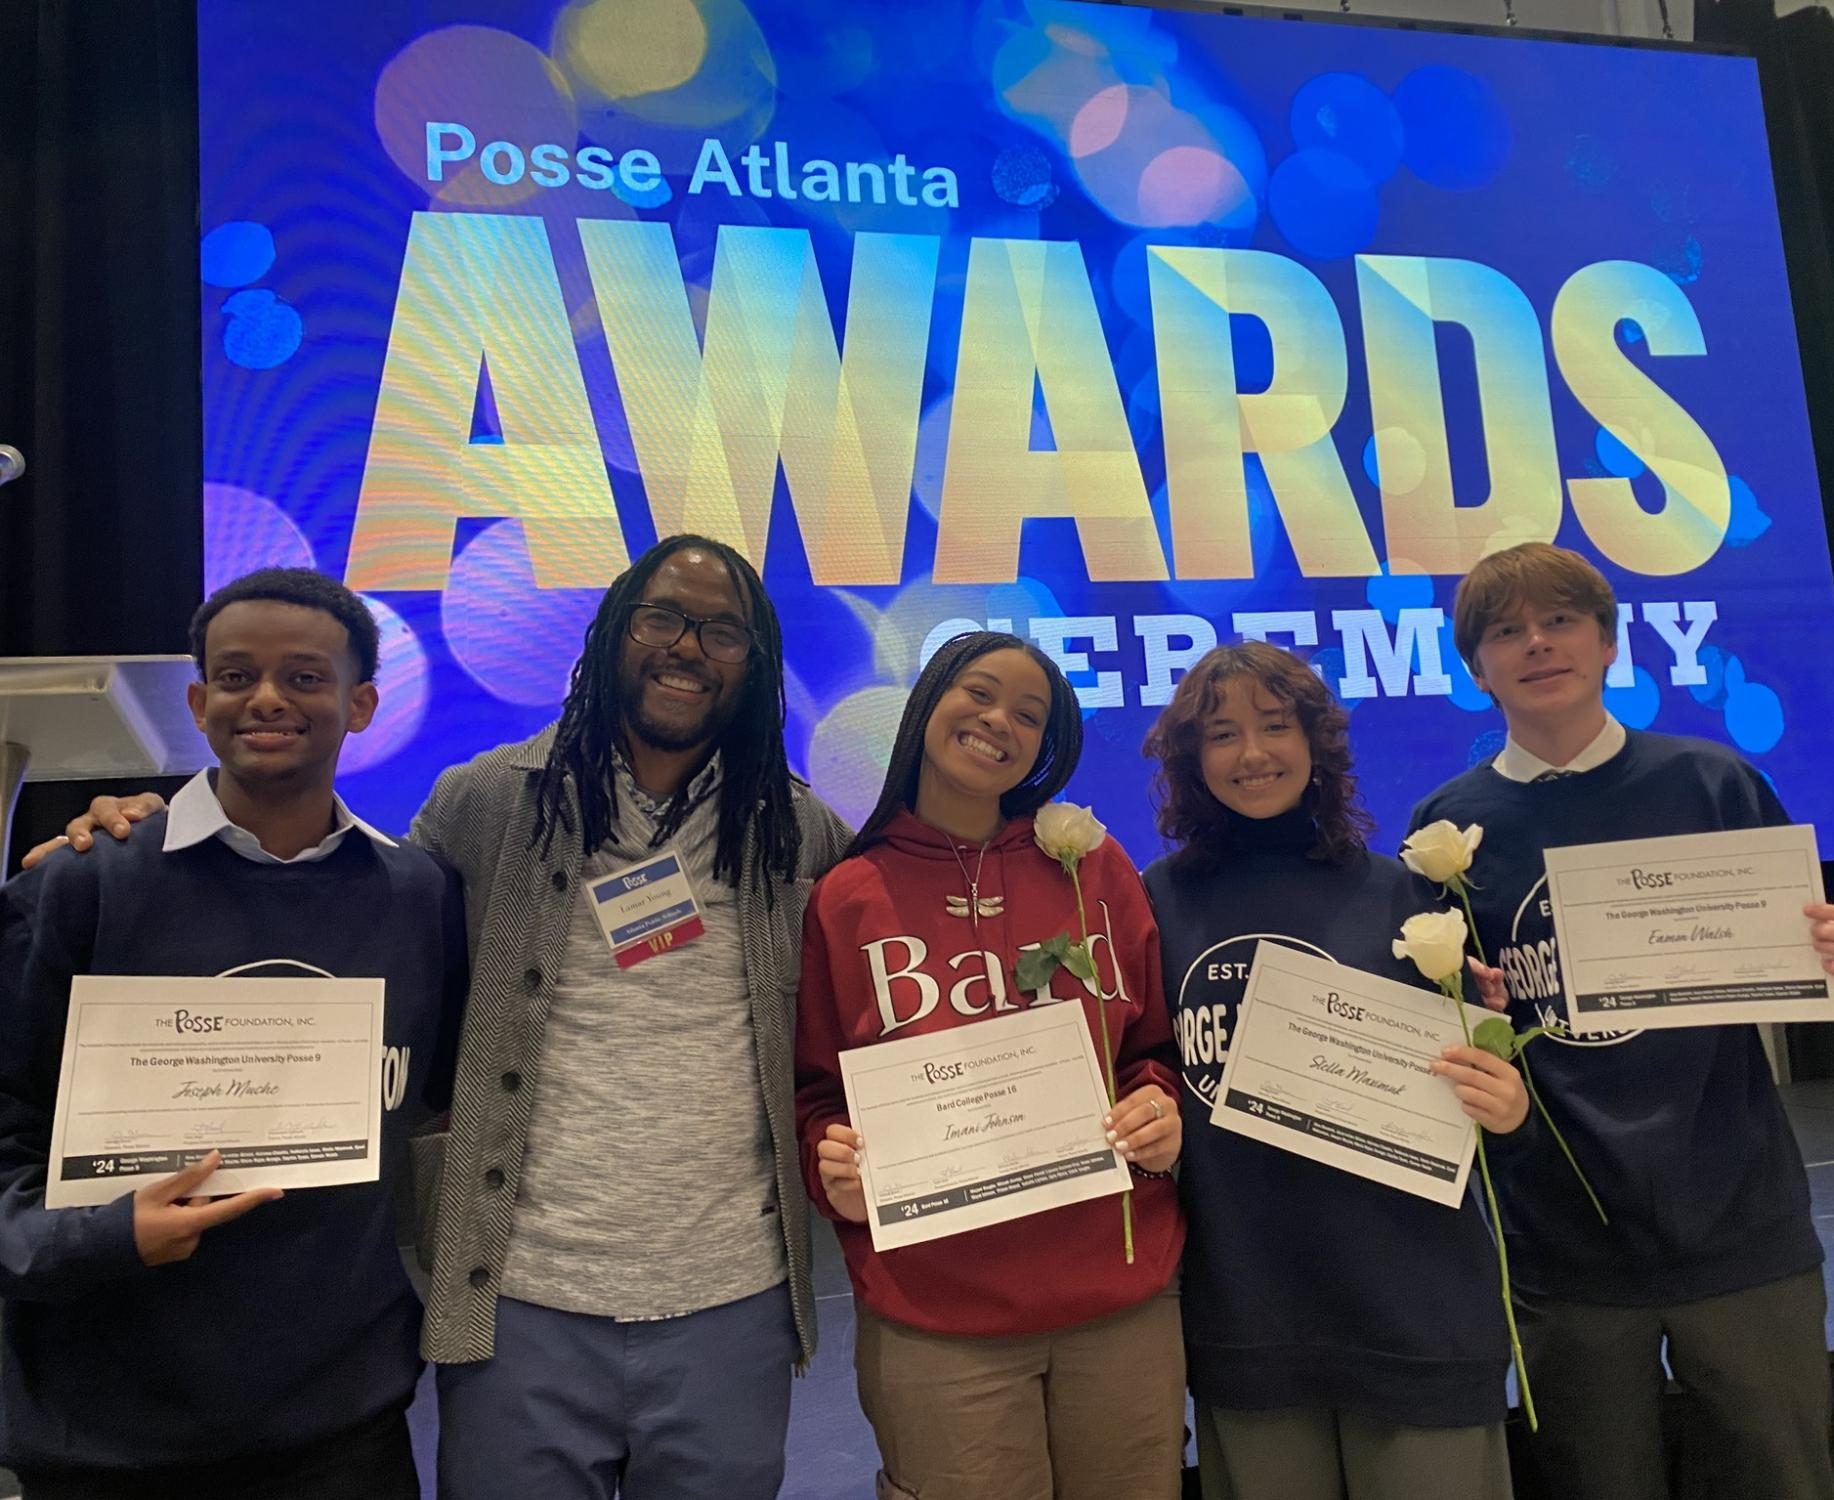 From left to right: Senior Joe Muche, Counselor Lamar Young, Seniors Imani Johnson, Stella Maximuk and Eamon Walsh smile after receiving their official Posse Scholarship certificate.